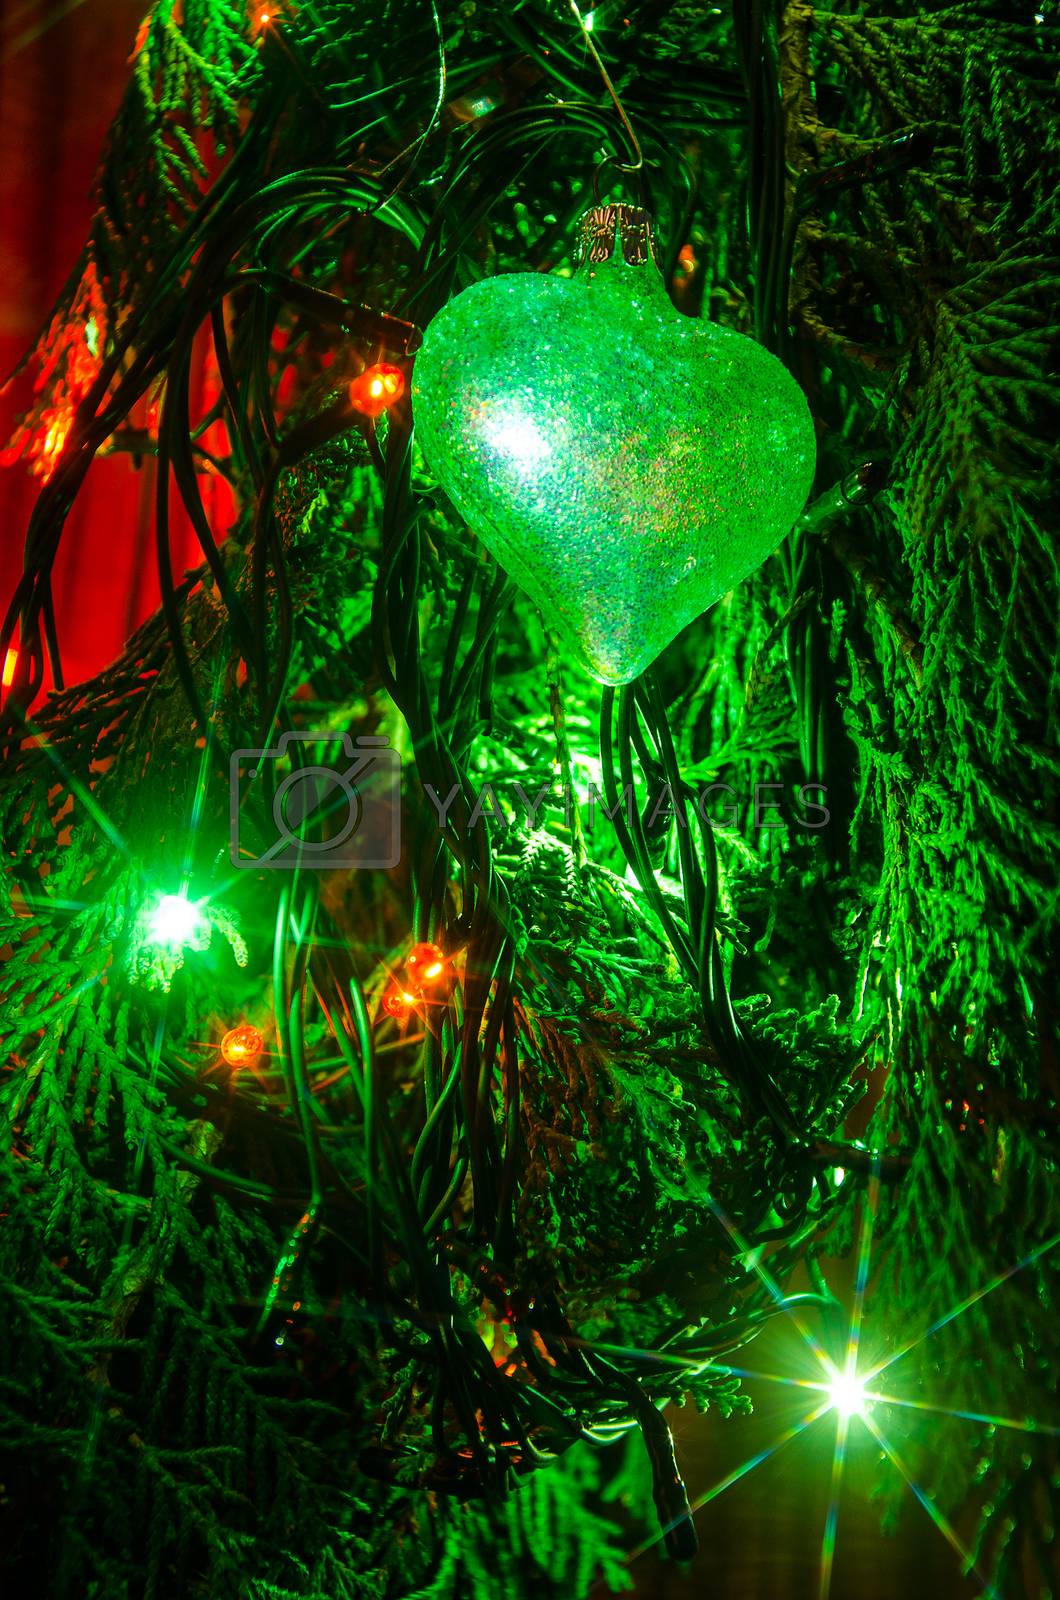 Royalty free image of Christmas lights are a classic symbol. by noskaphoto